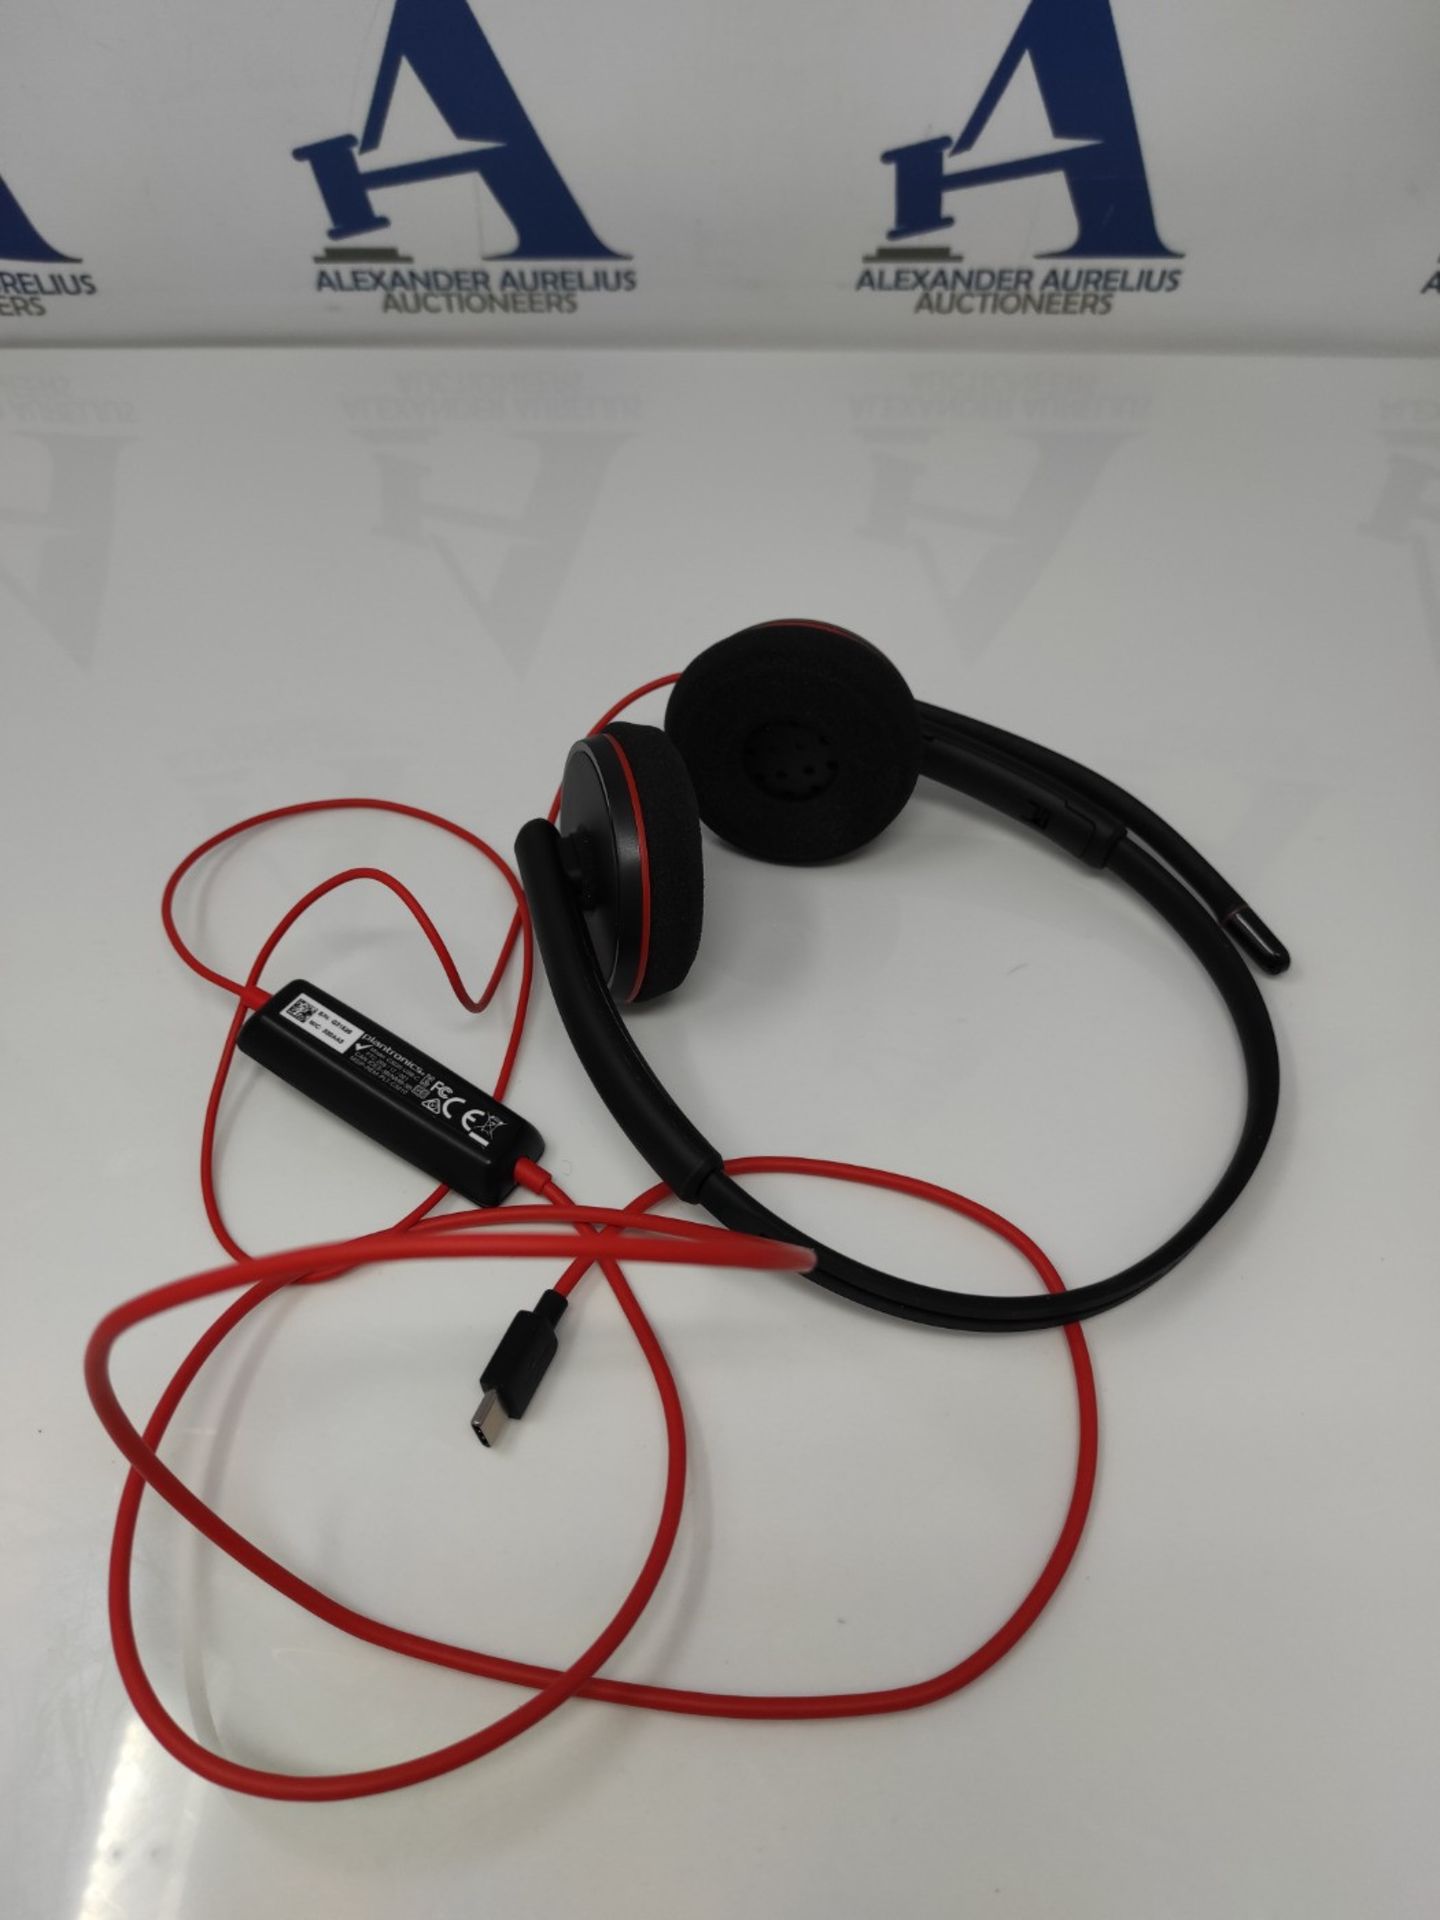 Plantronics - Blackwire 3220, wired headset - Two-ear headset (stereo) with microphone - Image 2 of 2